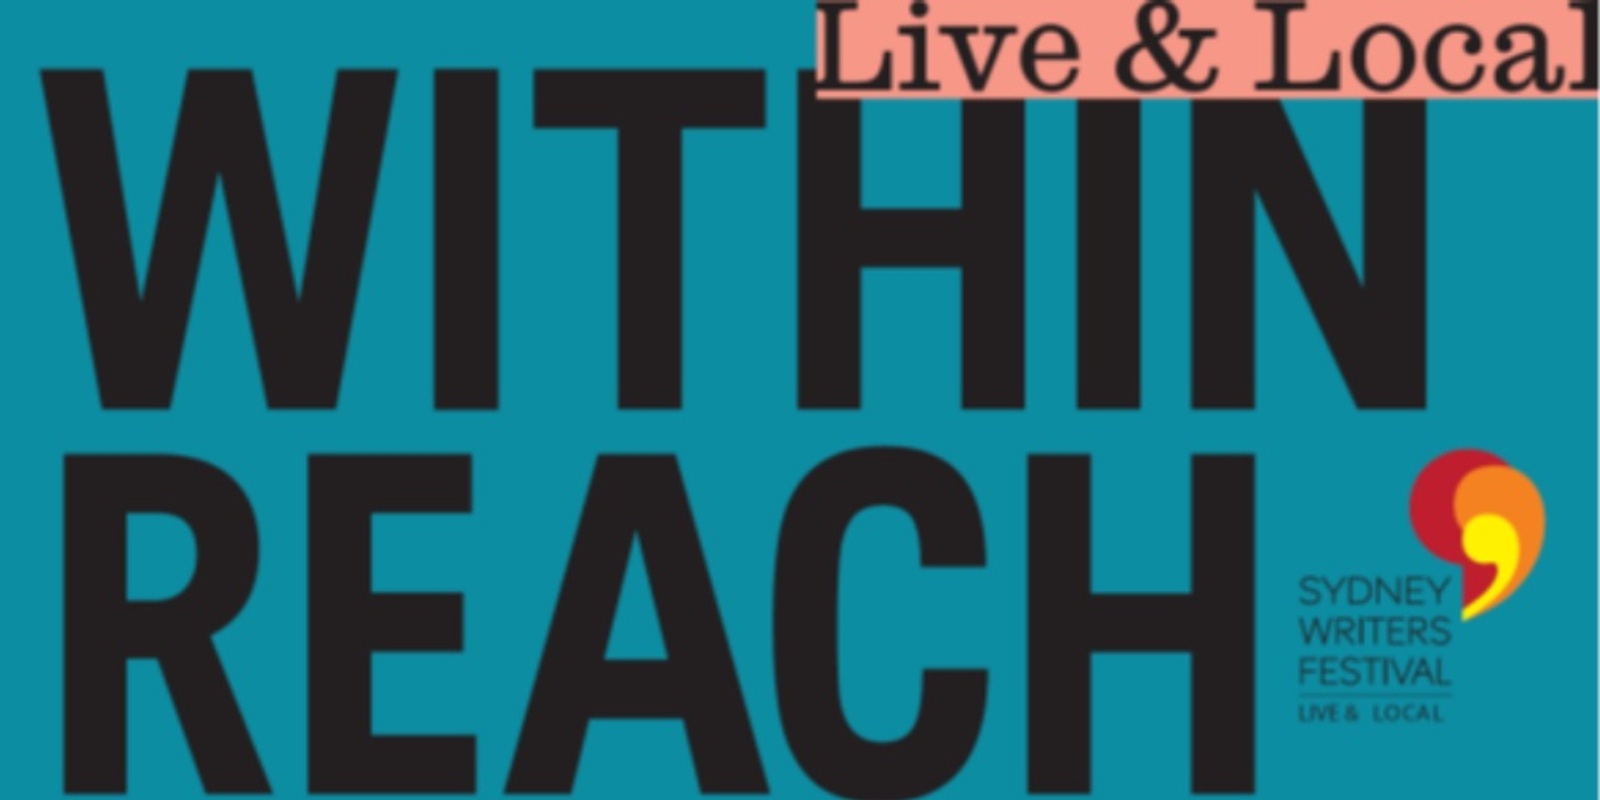 Banner image for Sydney Writers Festival Live & Local